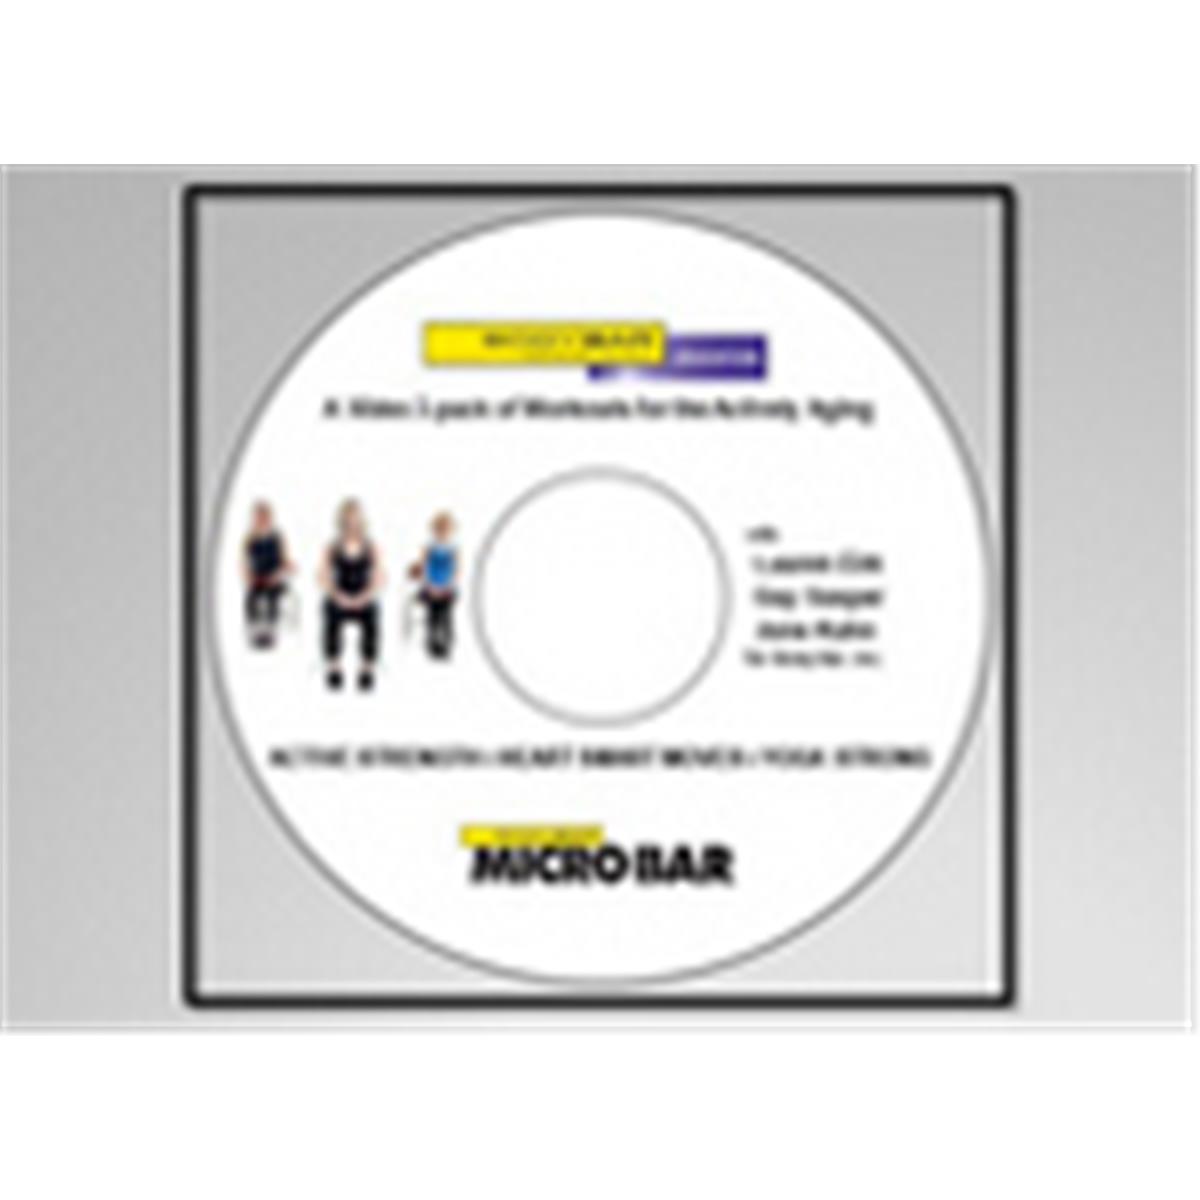 Picture of Body Bar DVD DVD-MMBAS Micro Bar Active Strength Video